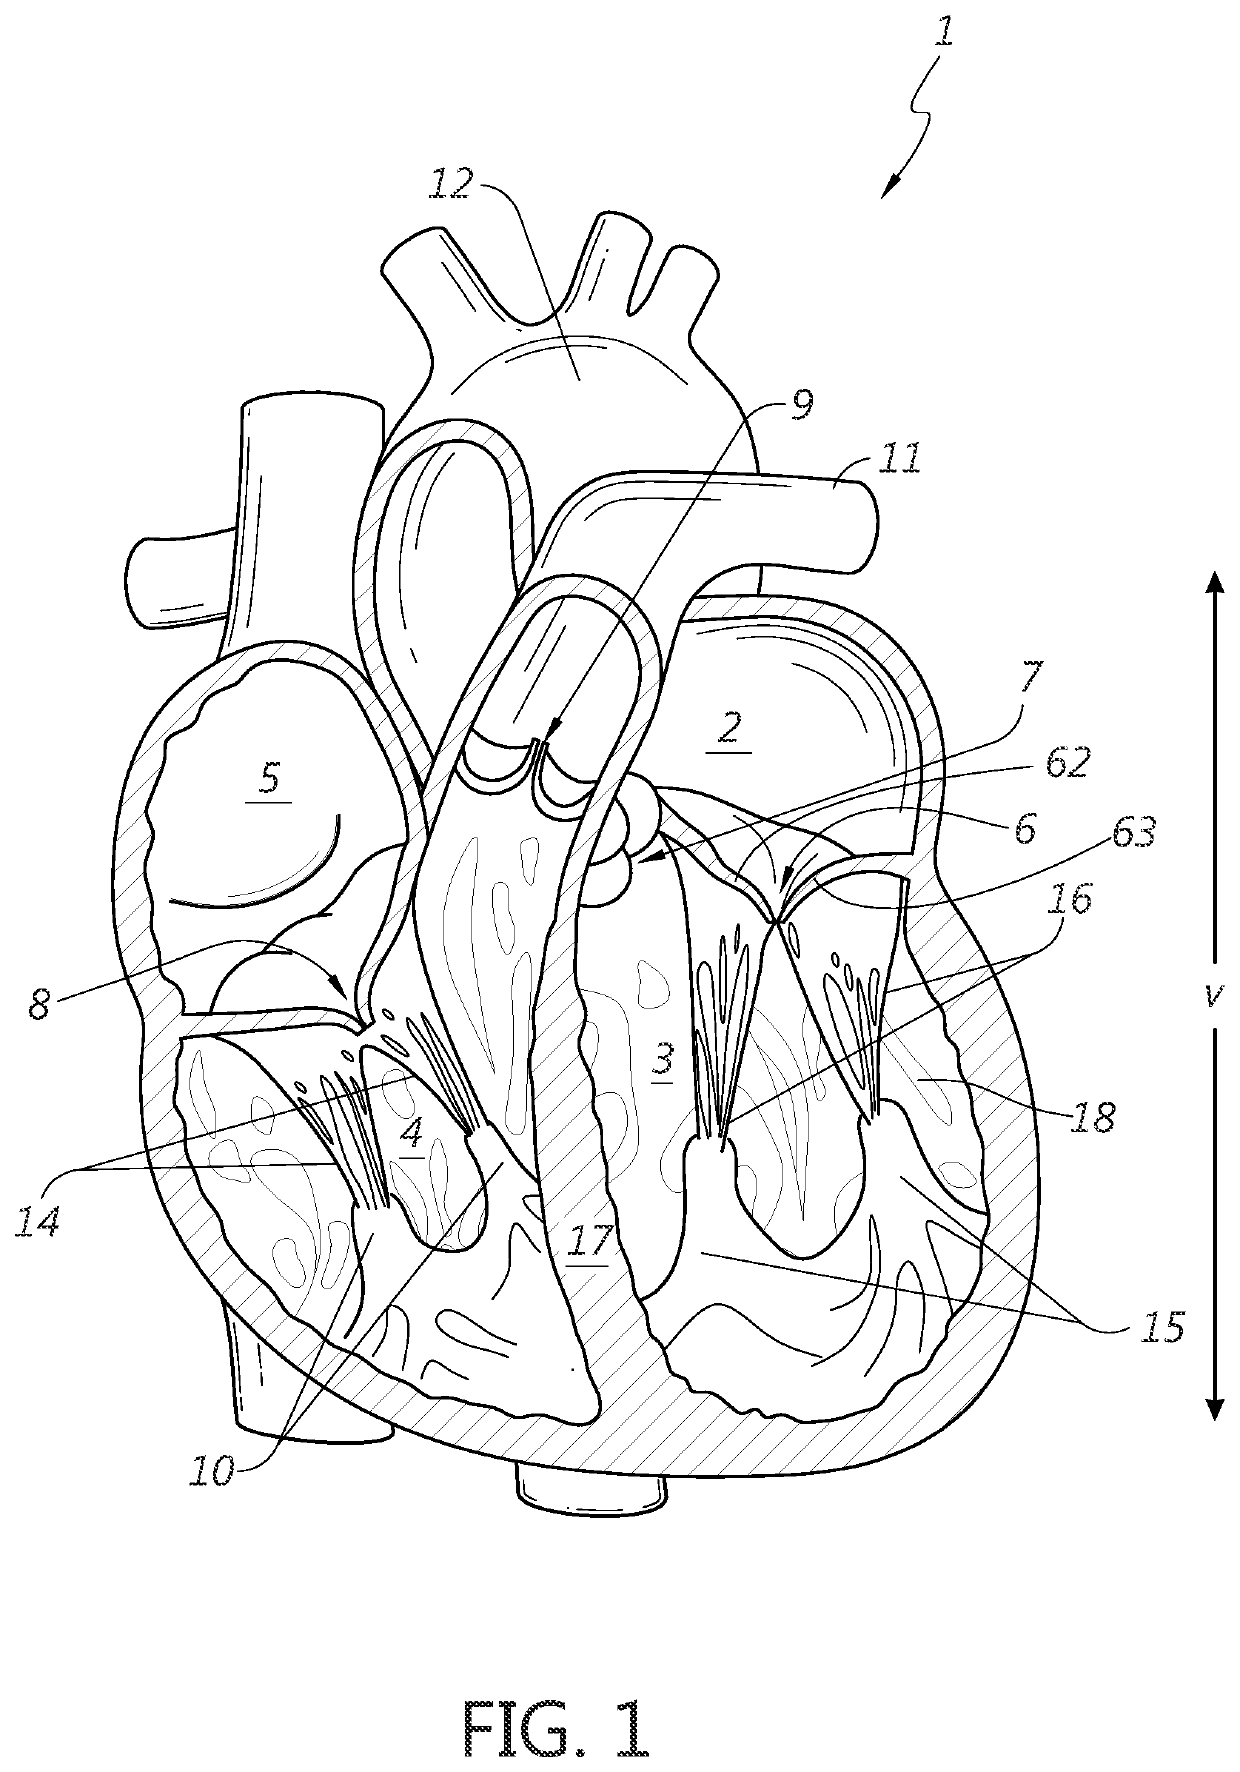 Ventricular remodeling using coil devices